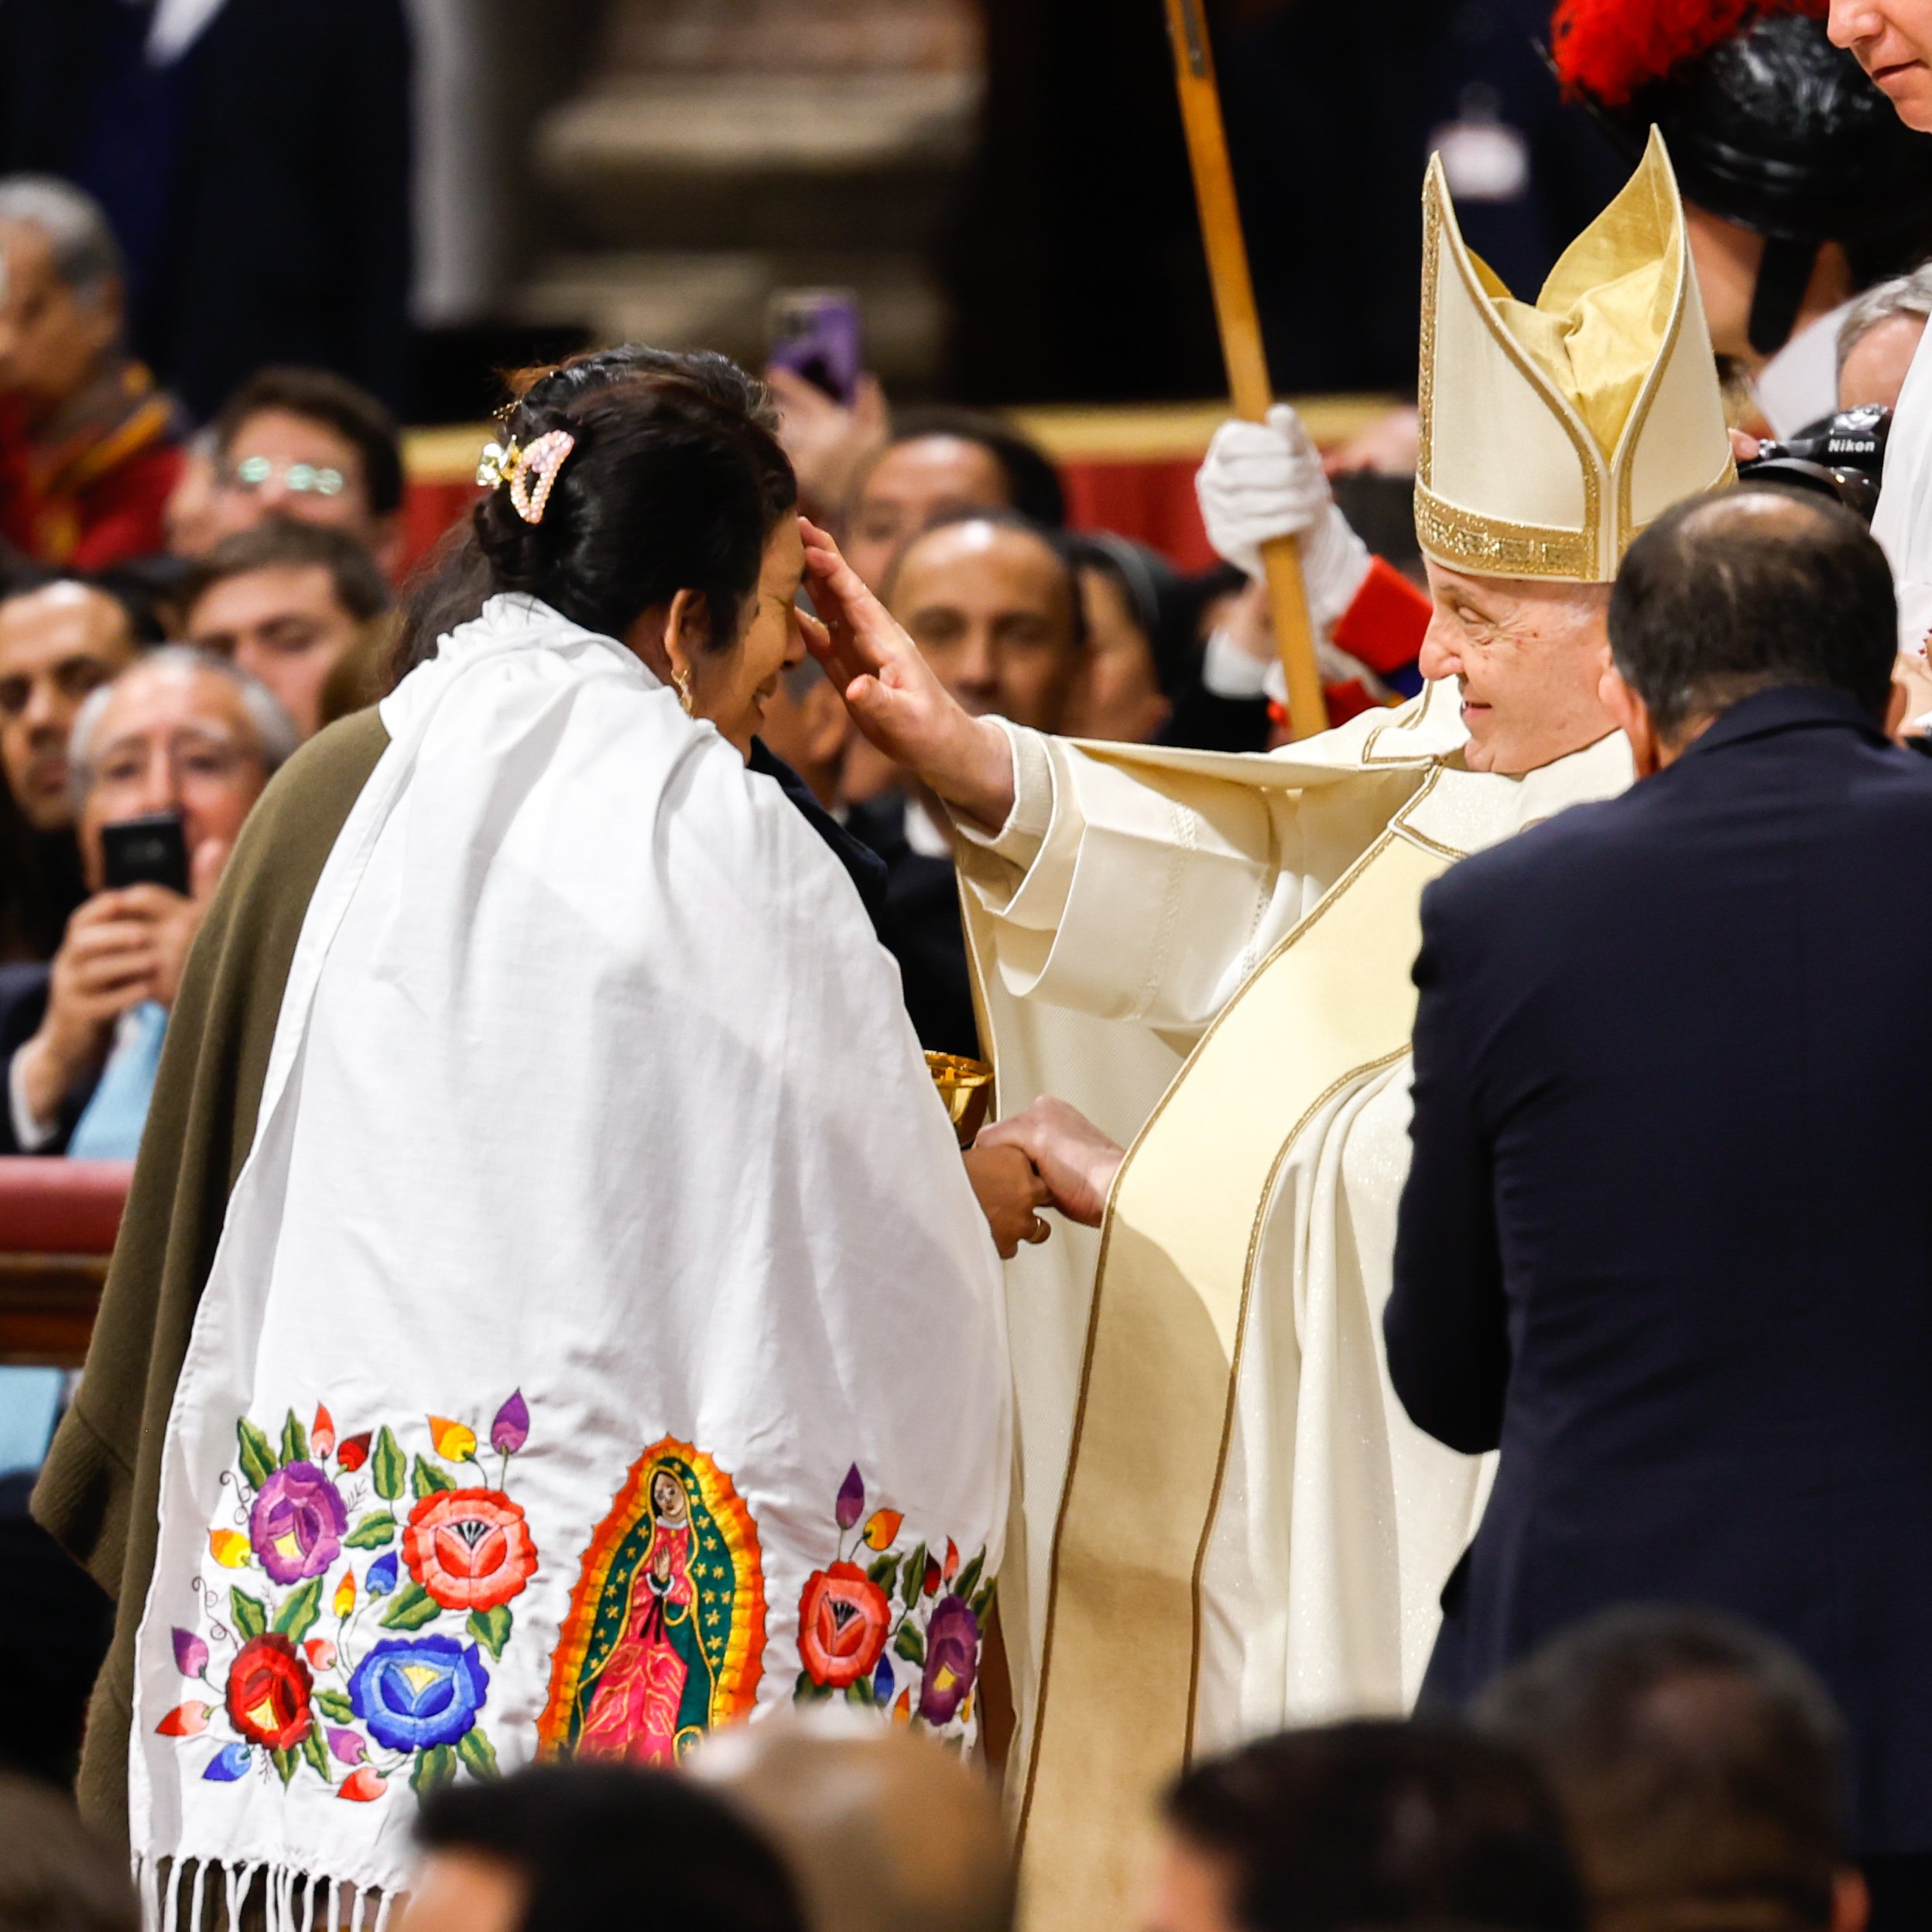 Pope Francis greets a woman.